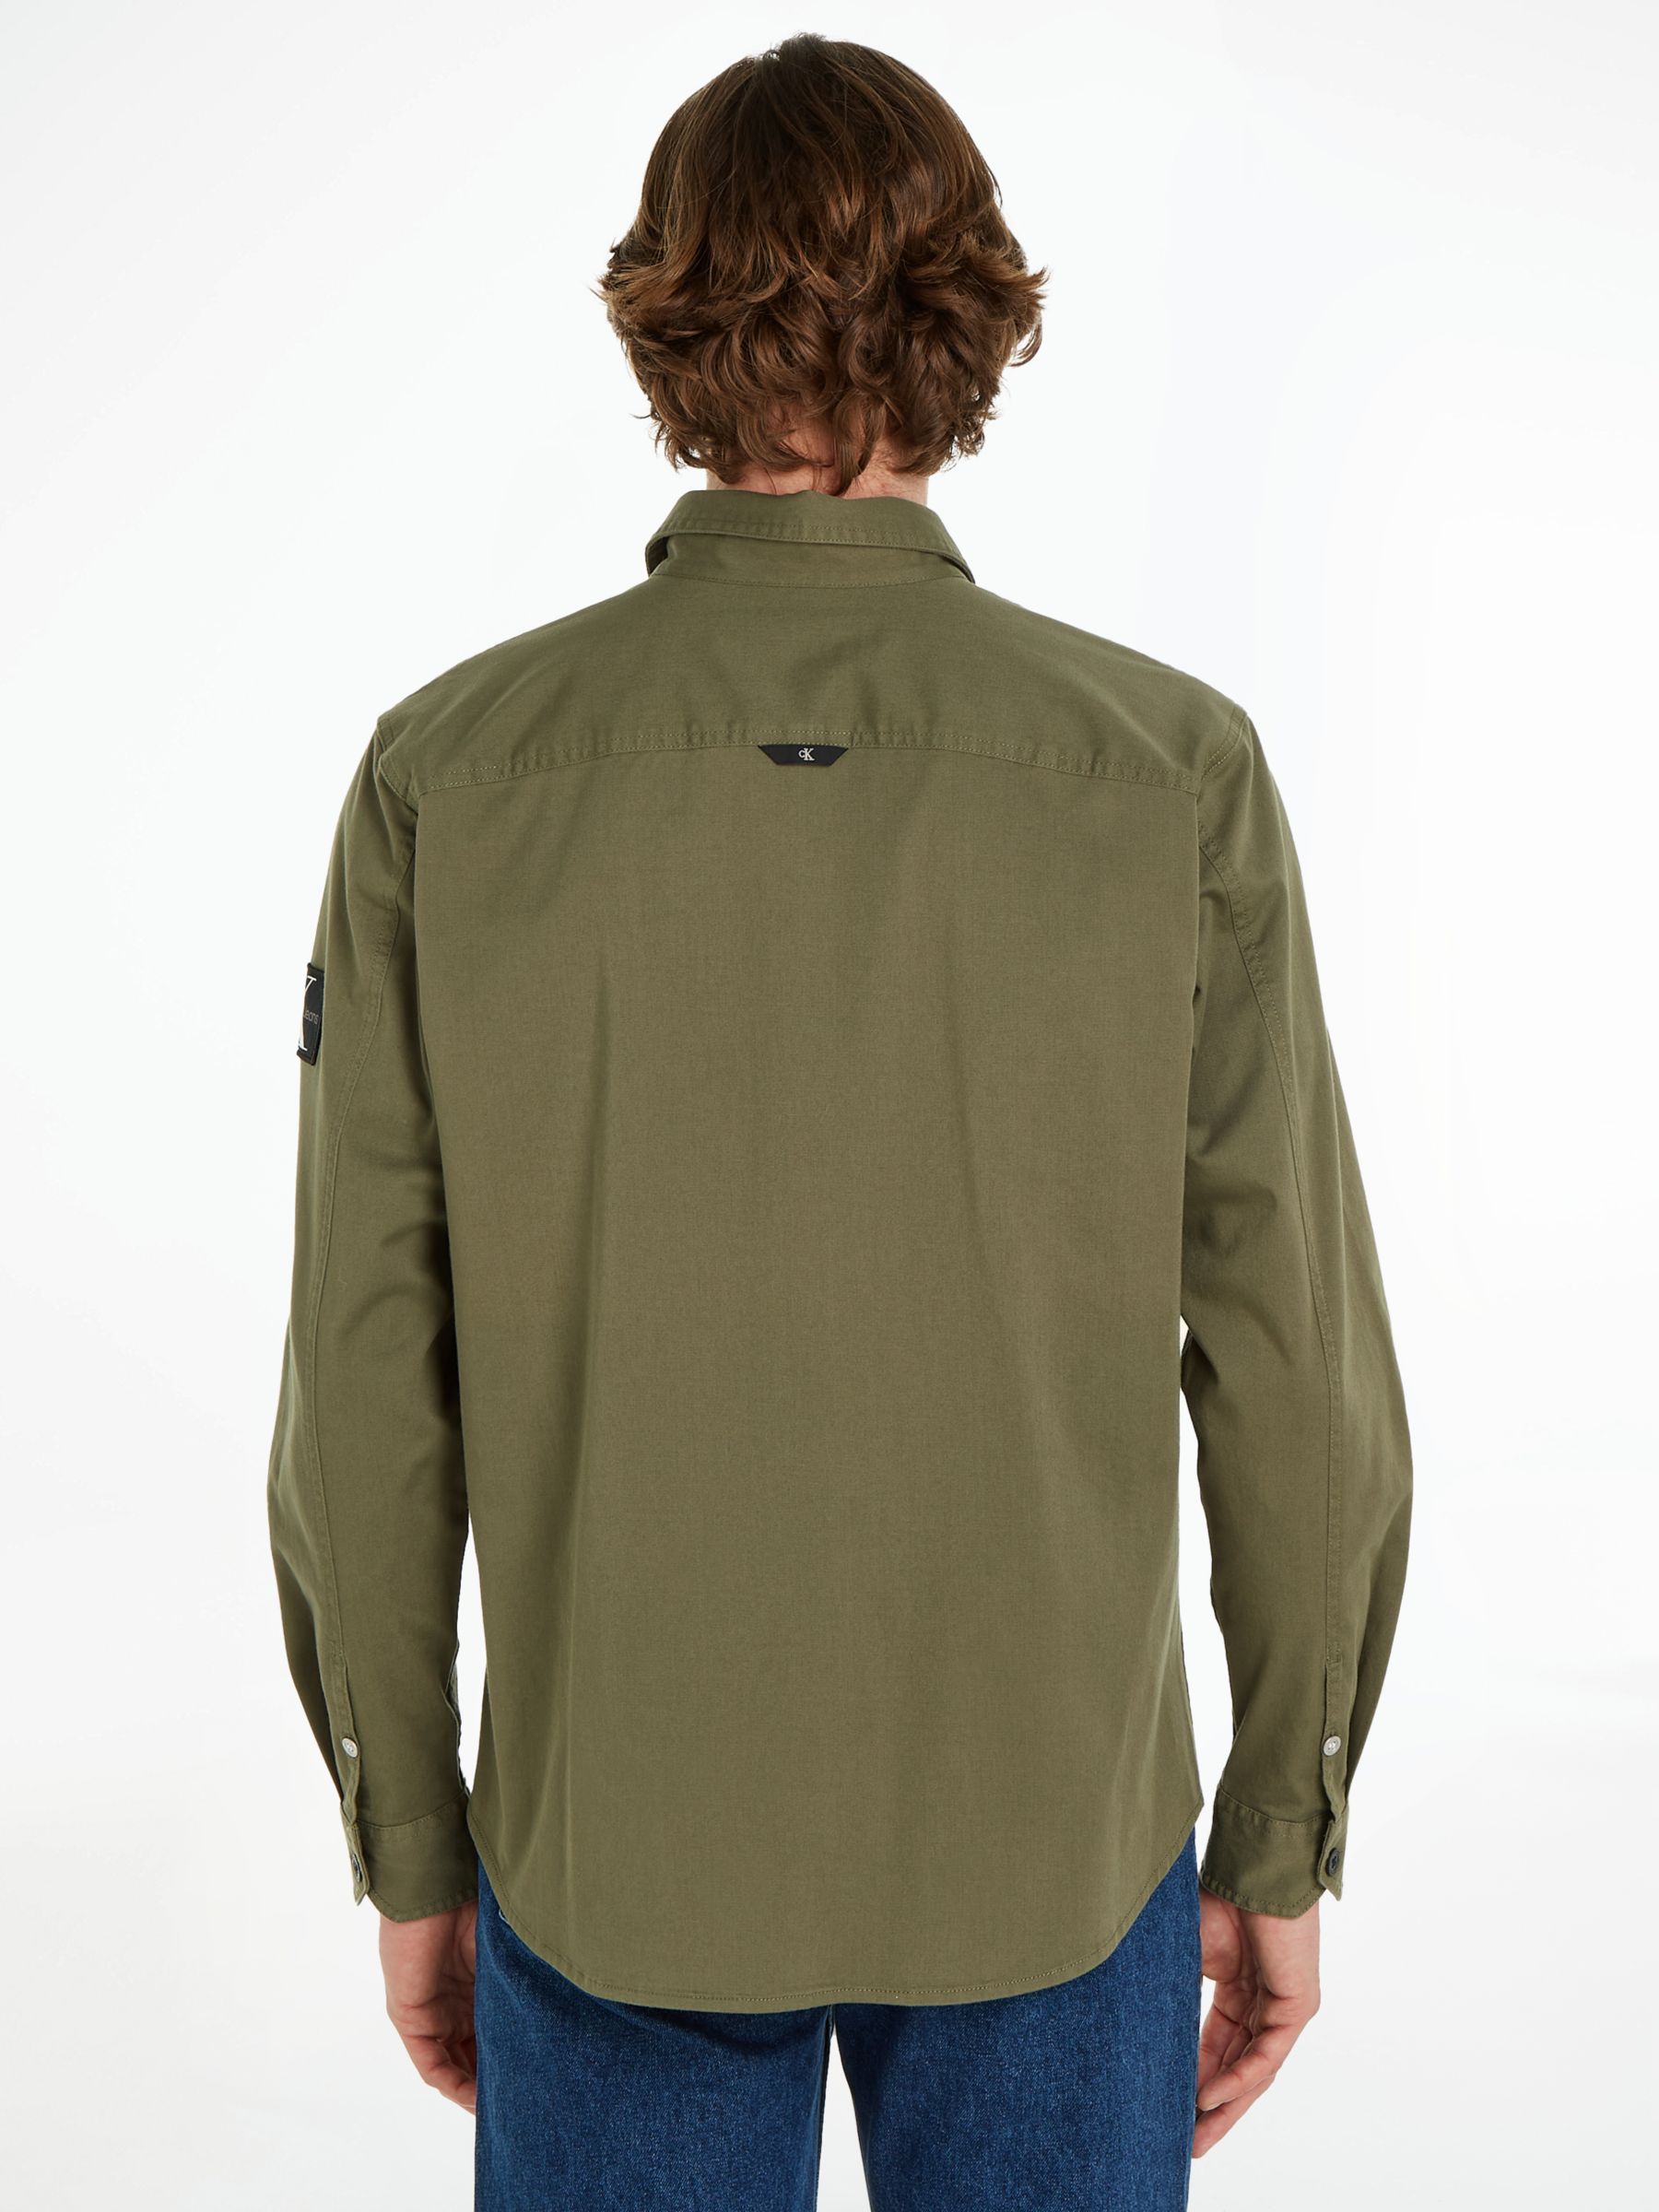 Calvin Klein Jeans Relaxed Monologo Shirt, Dusty Olive, L